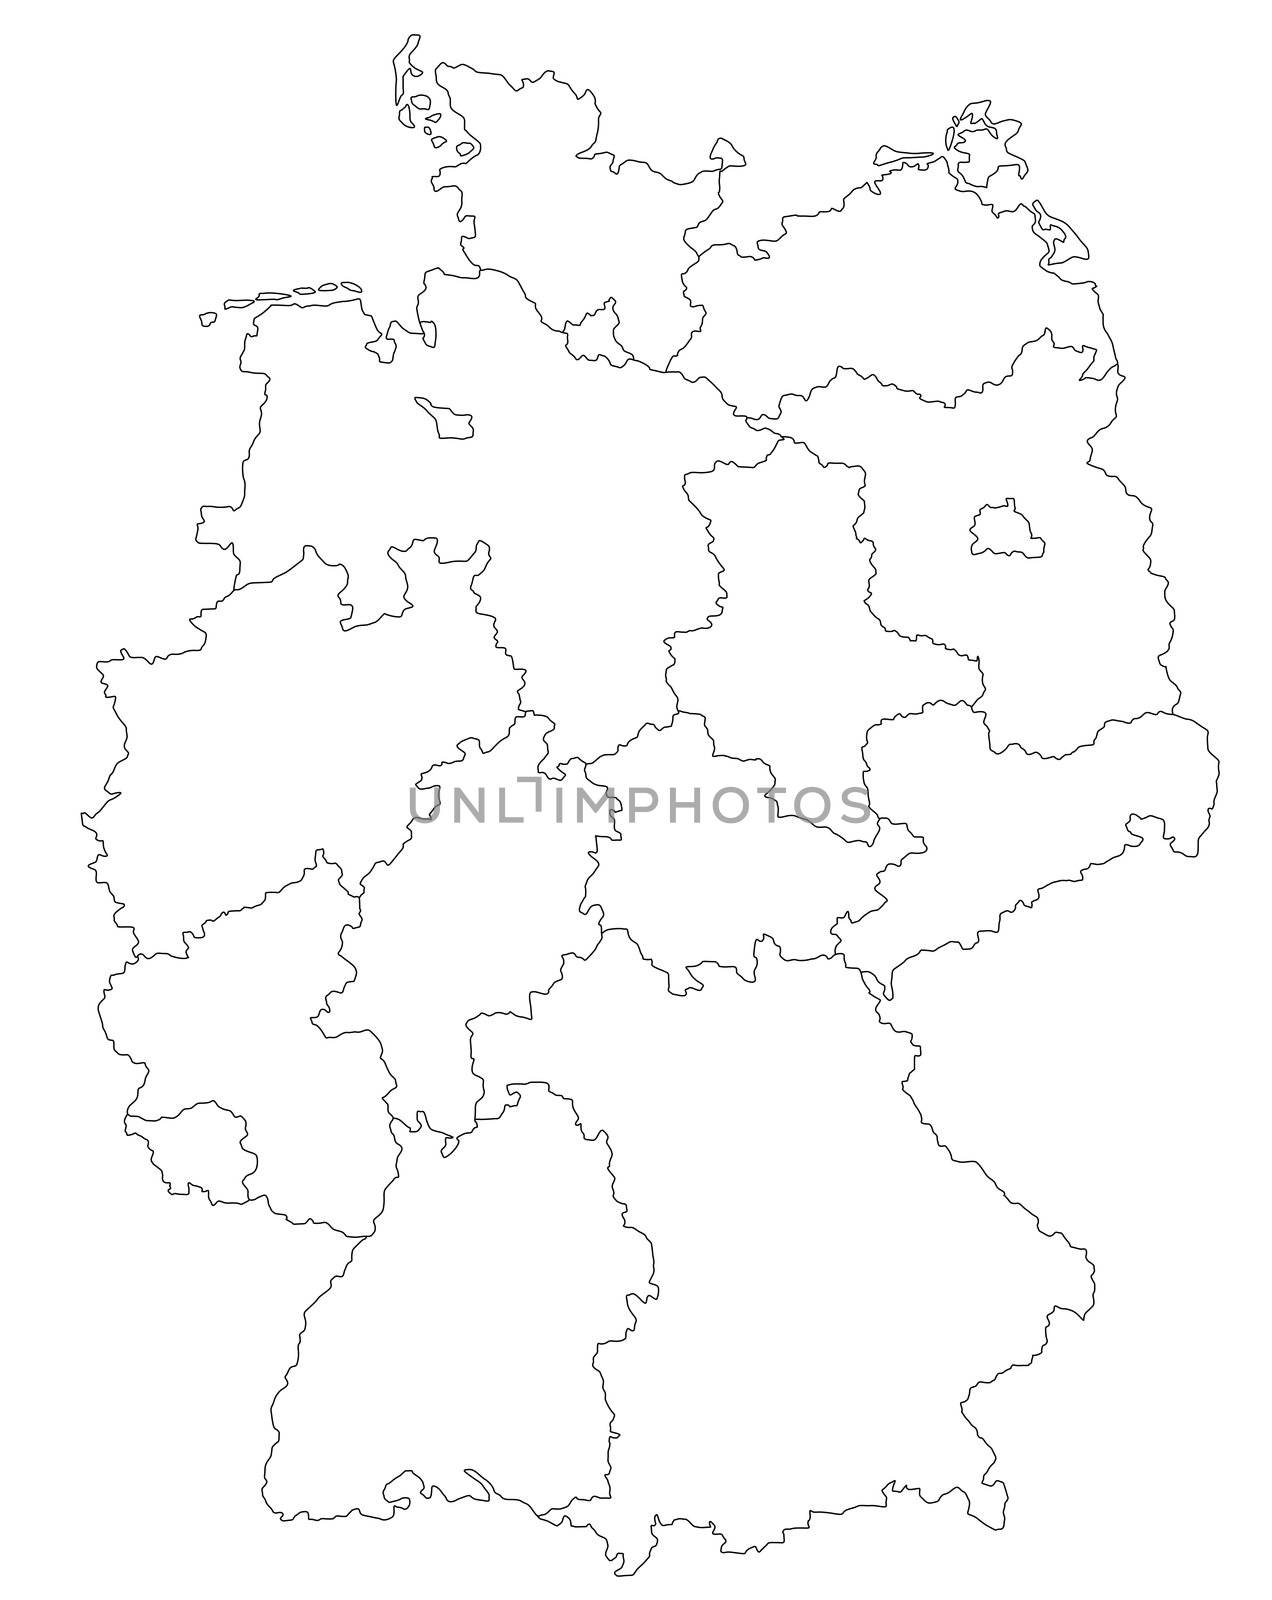 A stylized map of Germany showing the different states. All isolated on white background.